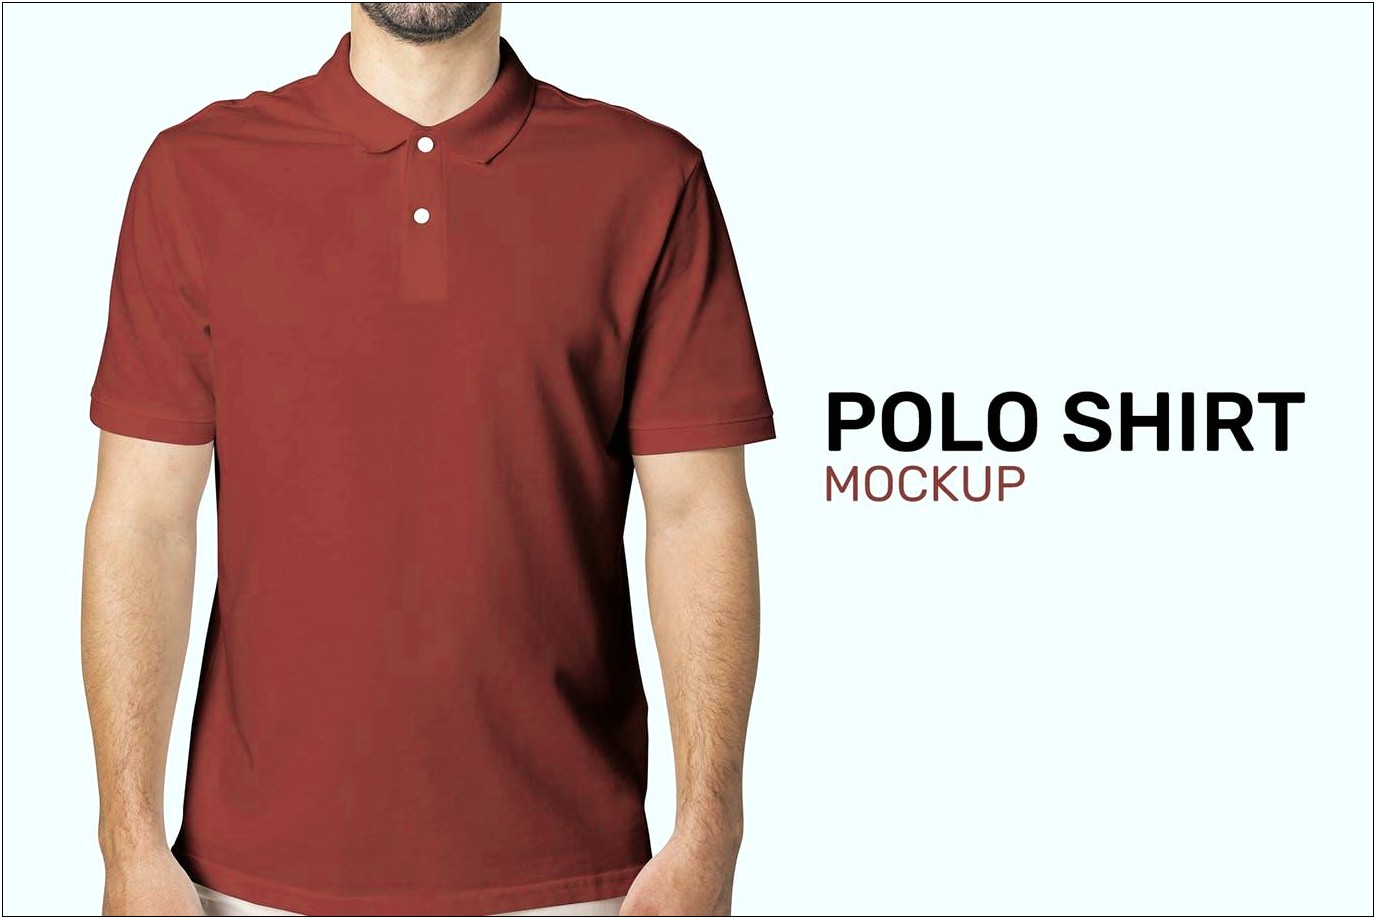 Are Polo Shirts Good For Dropping Off Resumes